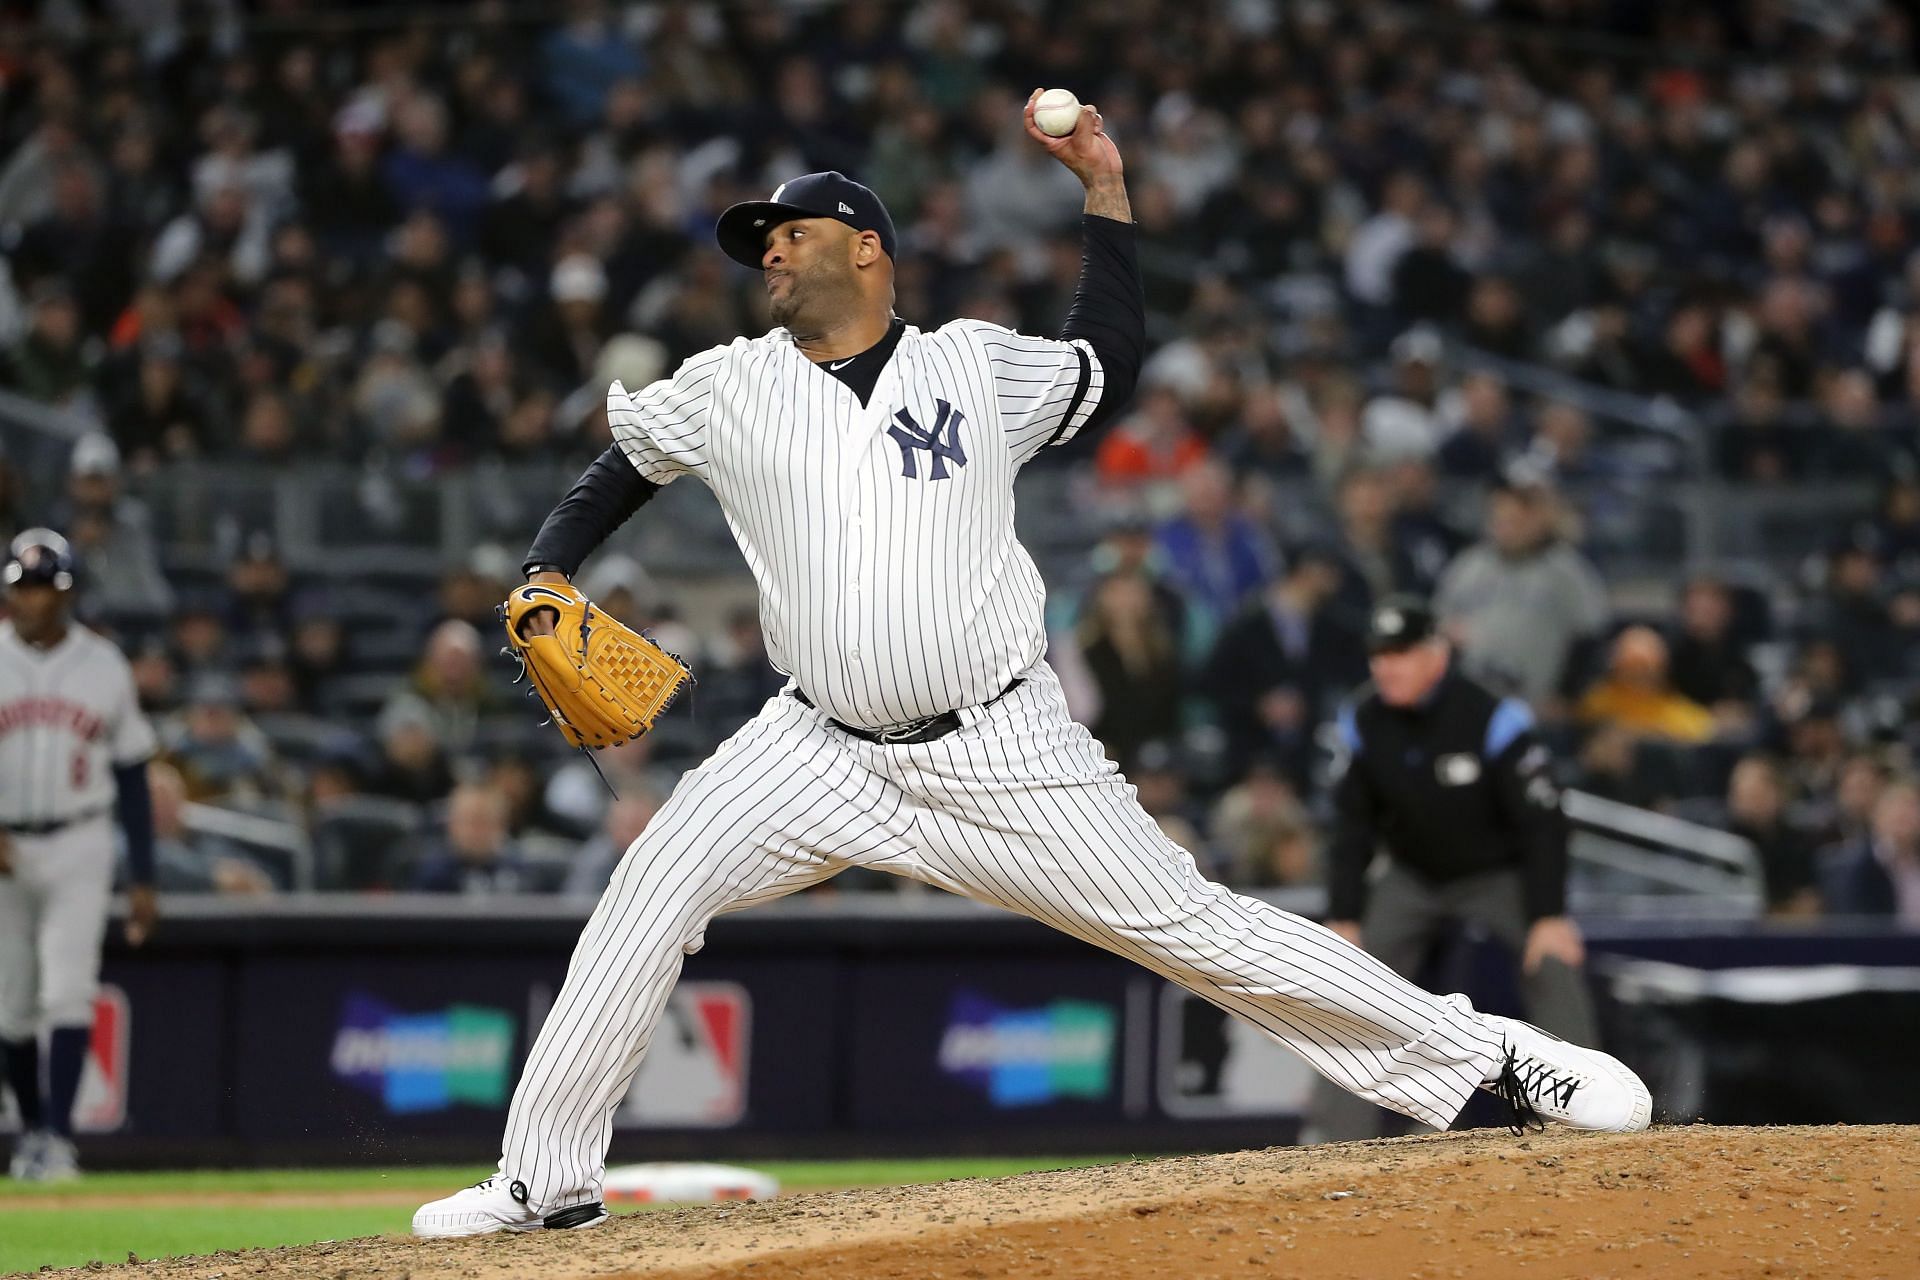 Indians thank CC Sabathia as former ace retires from baseball